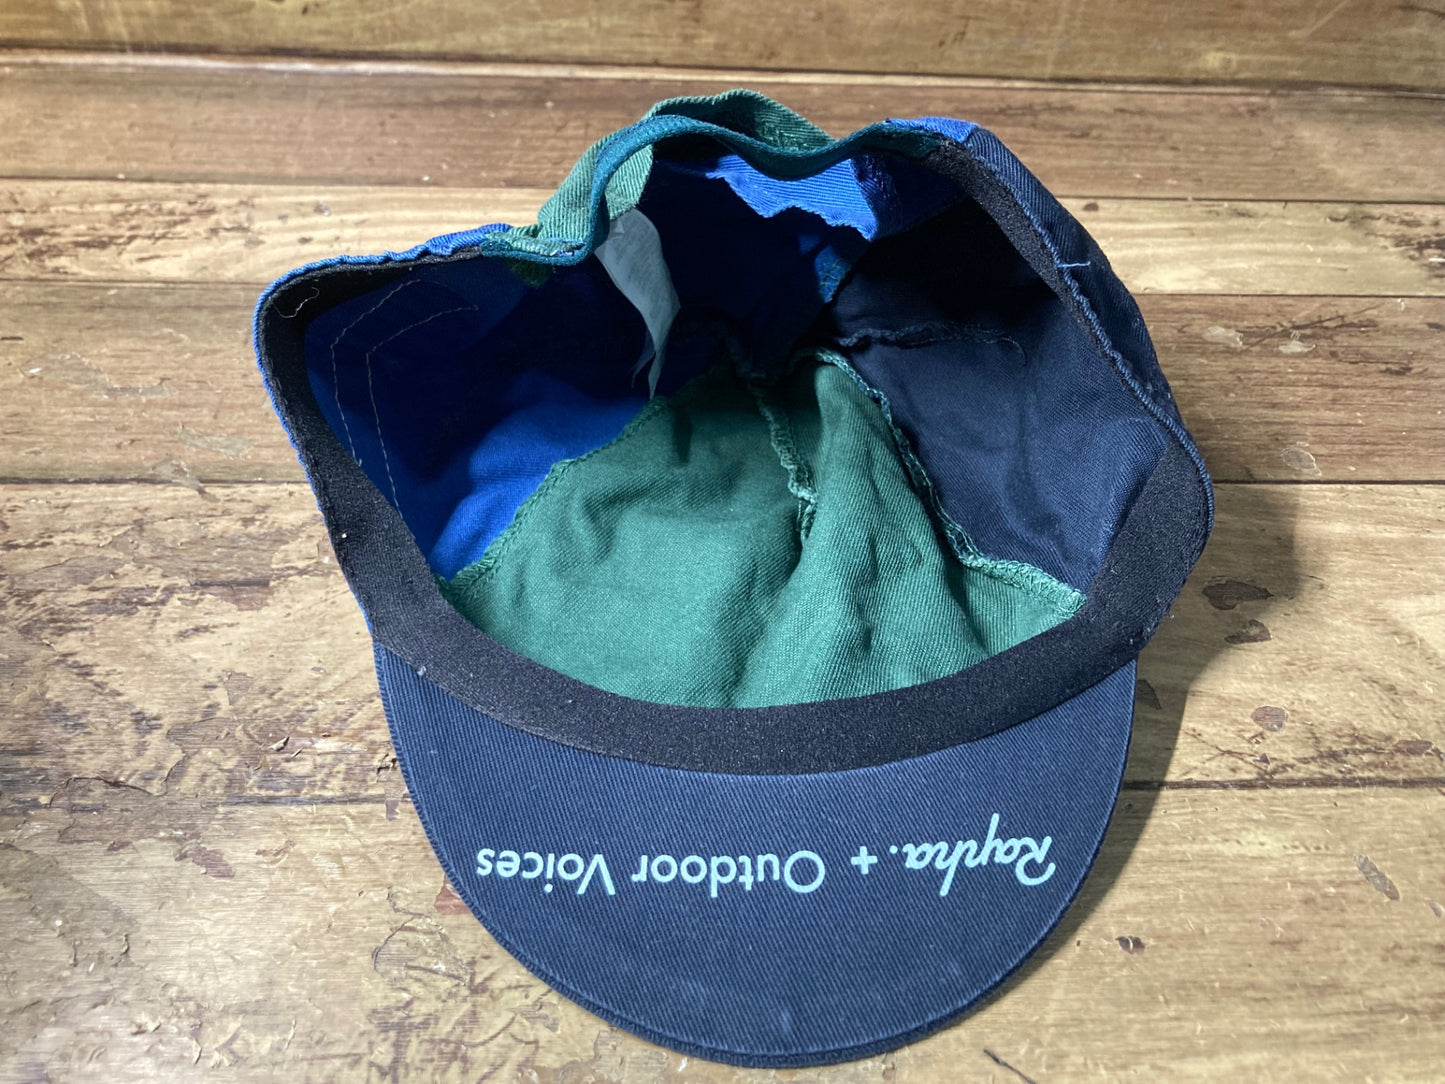 HU614 ラファ Rapha + Outdoor Voices X OUTDOOR VOICES CYCLING CAP サイクルキャップ 紺 緑